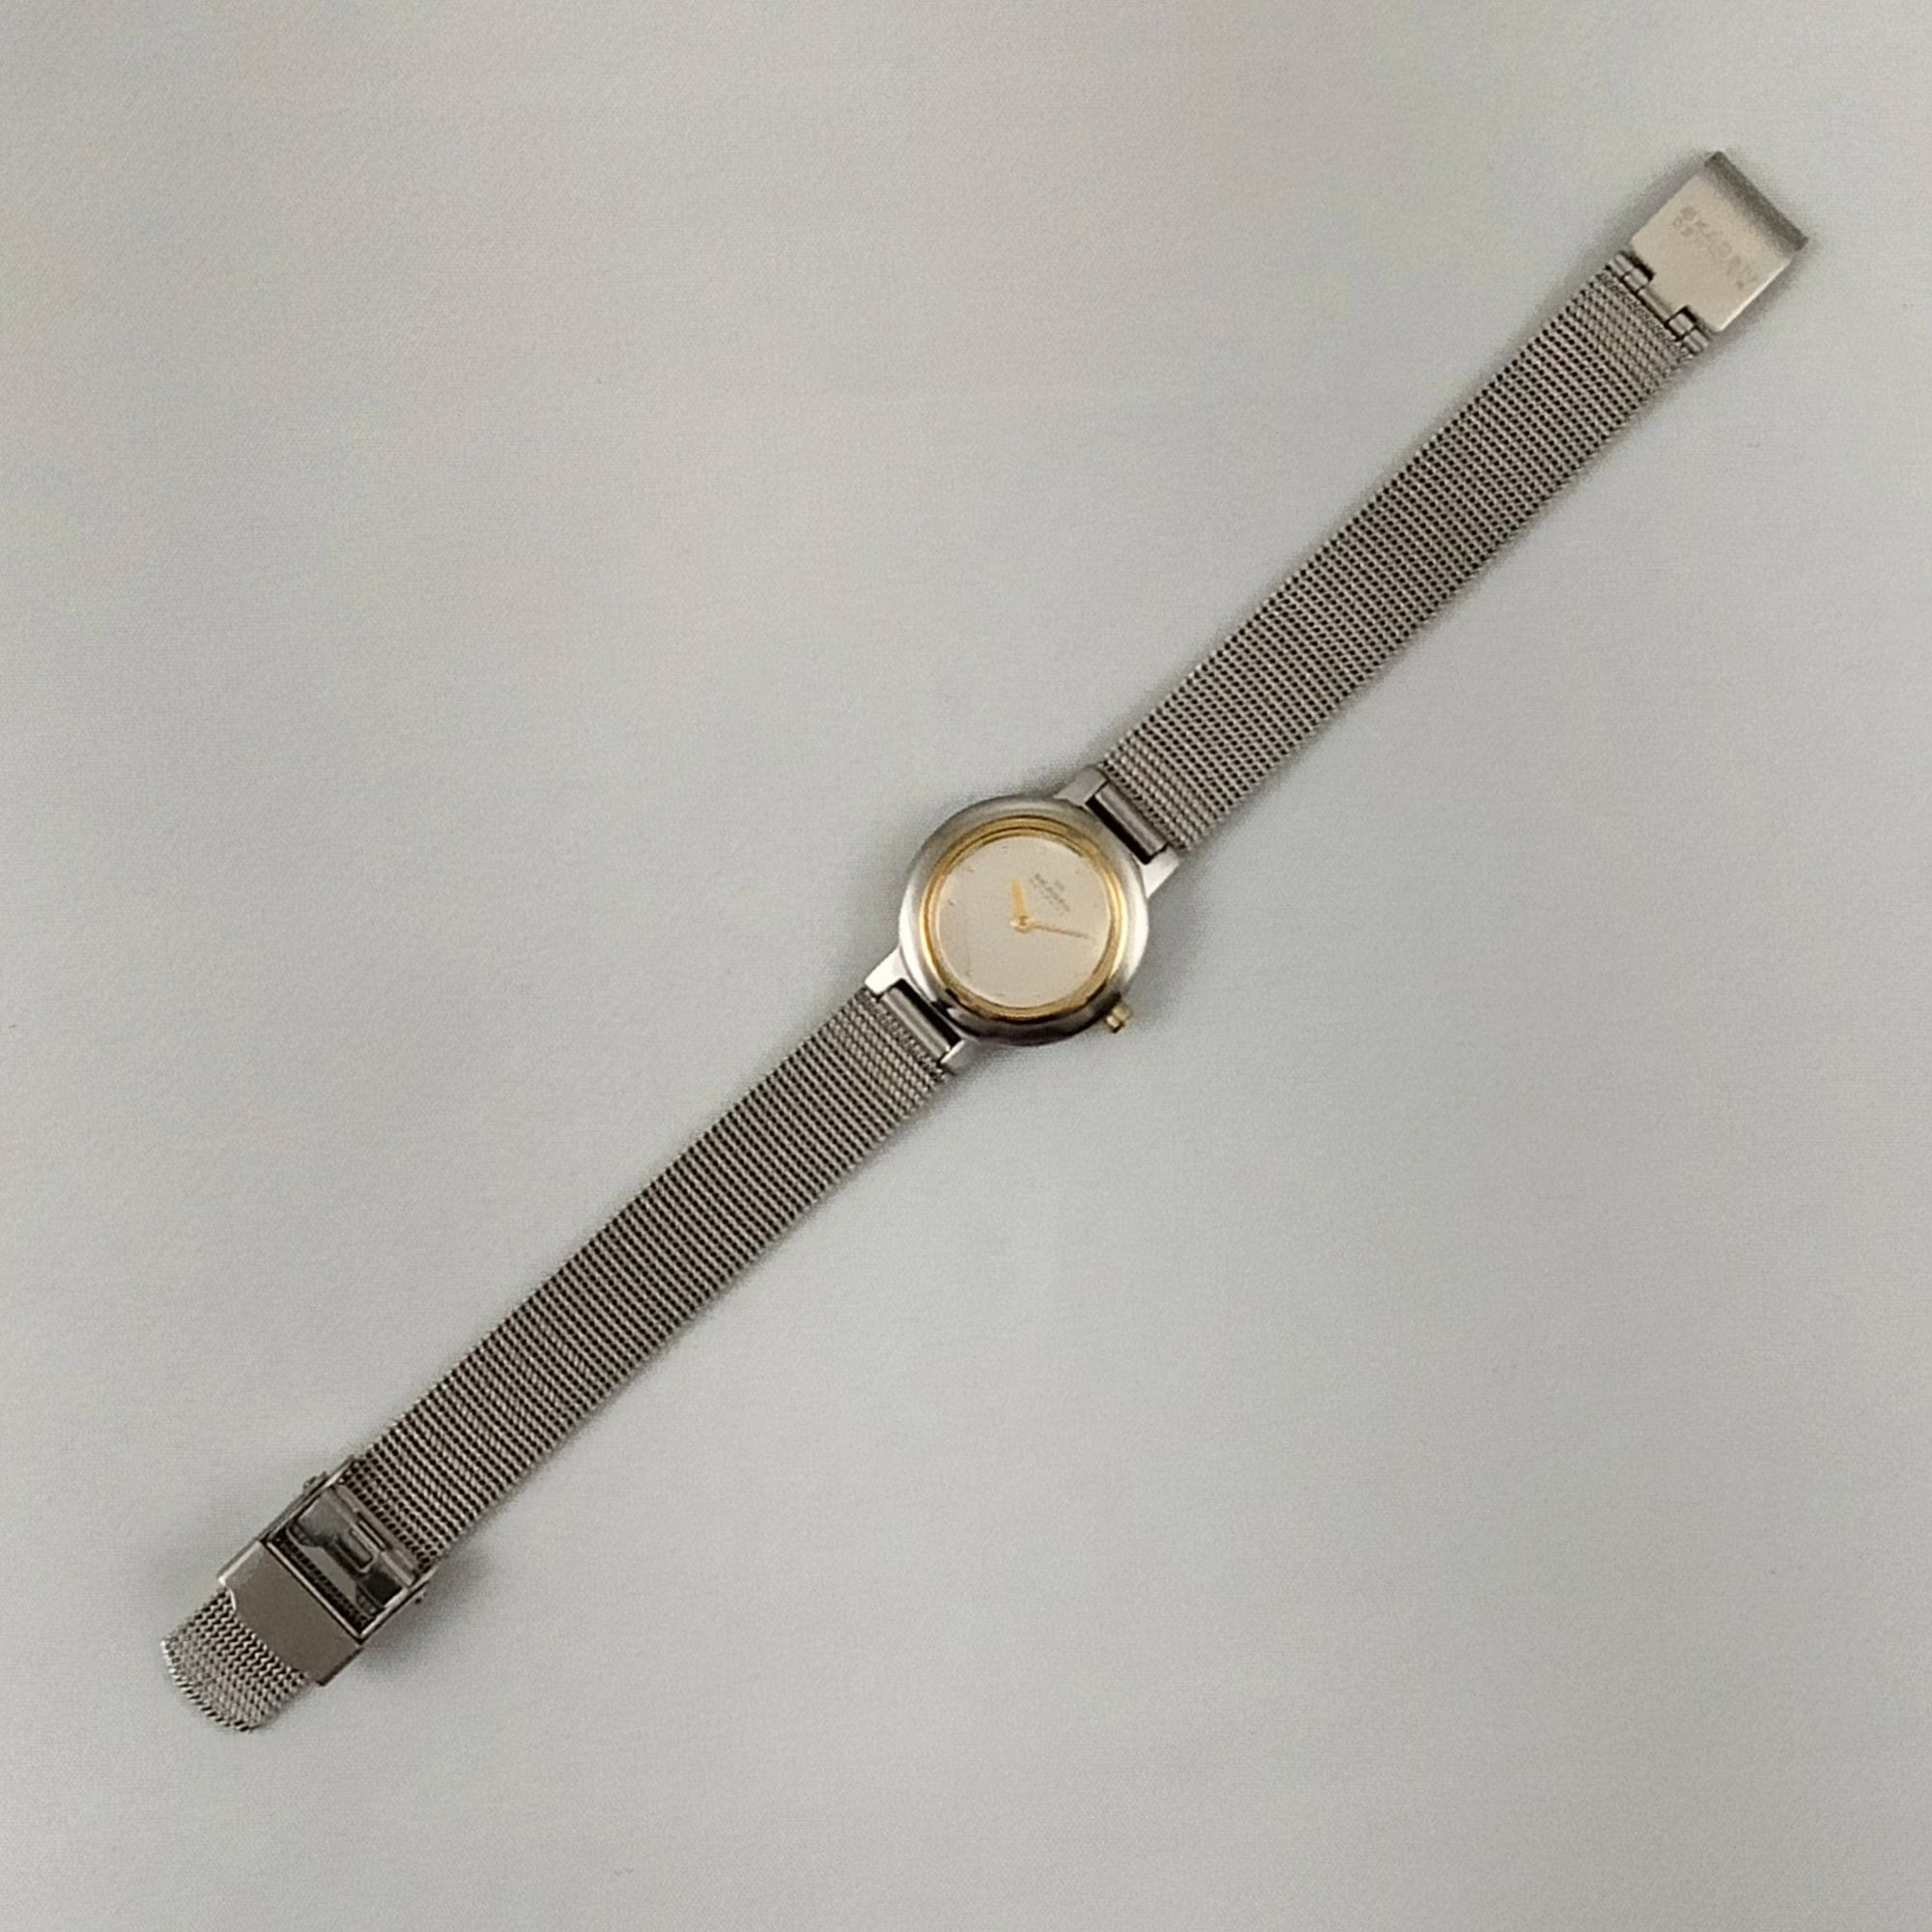 I Like Mikes Mid Century Modern Watches Skagen Women's Stainless Steel Watch, Gold Tone Dot Hour Markers and Hands, Mesh Strap